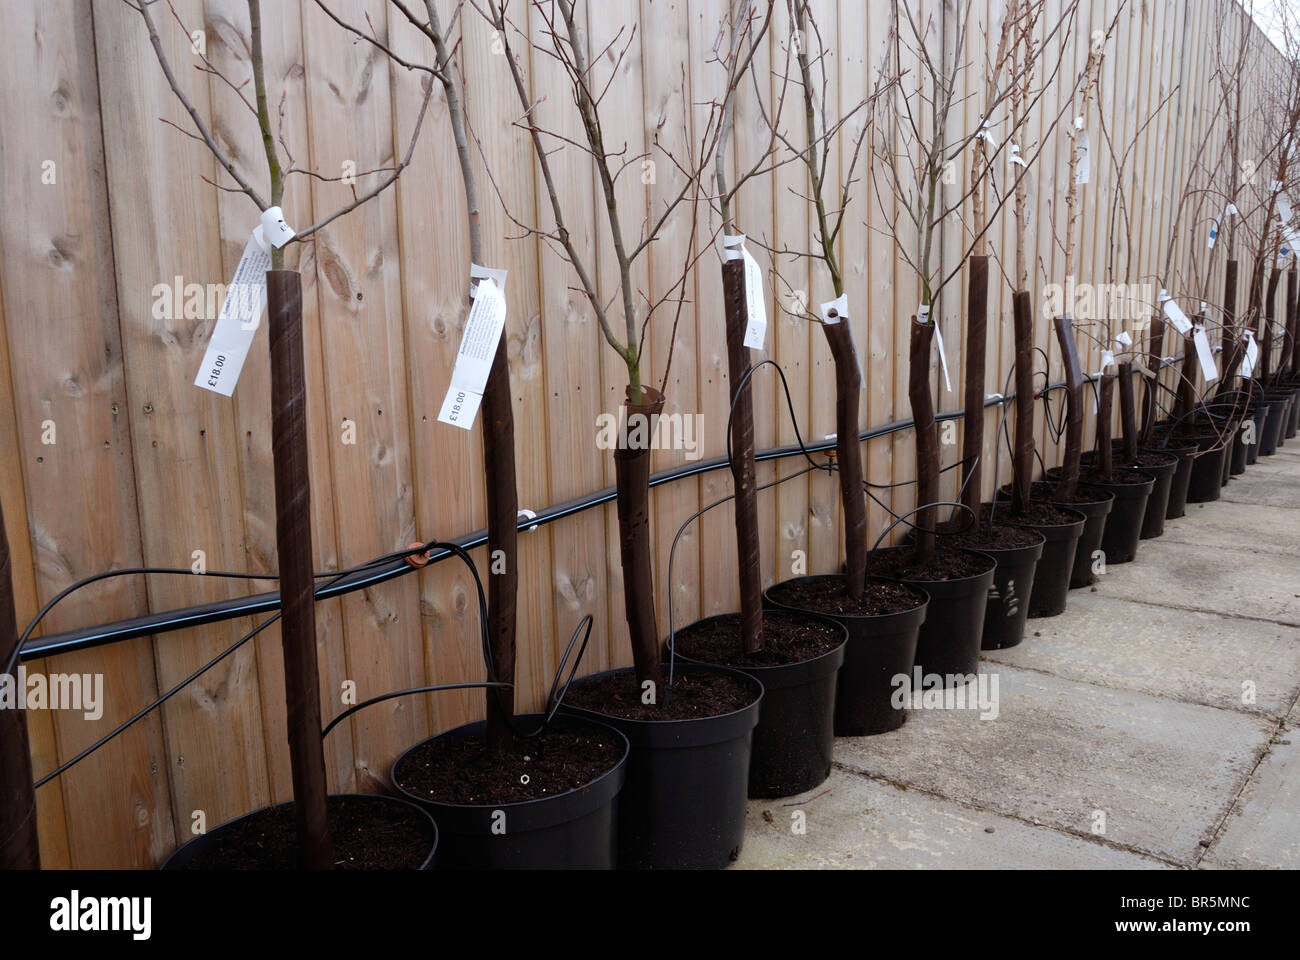 Ornamental trees for sale at a garden centre in pots with an irrigation system attached. Stock Photo